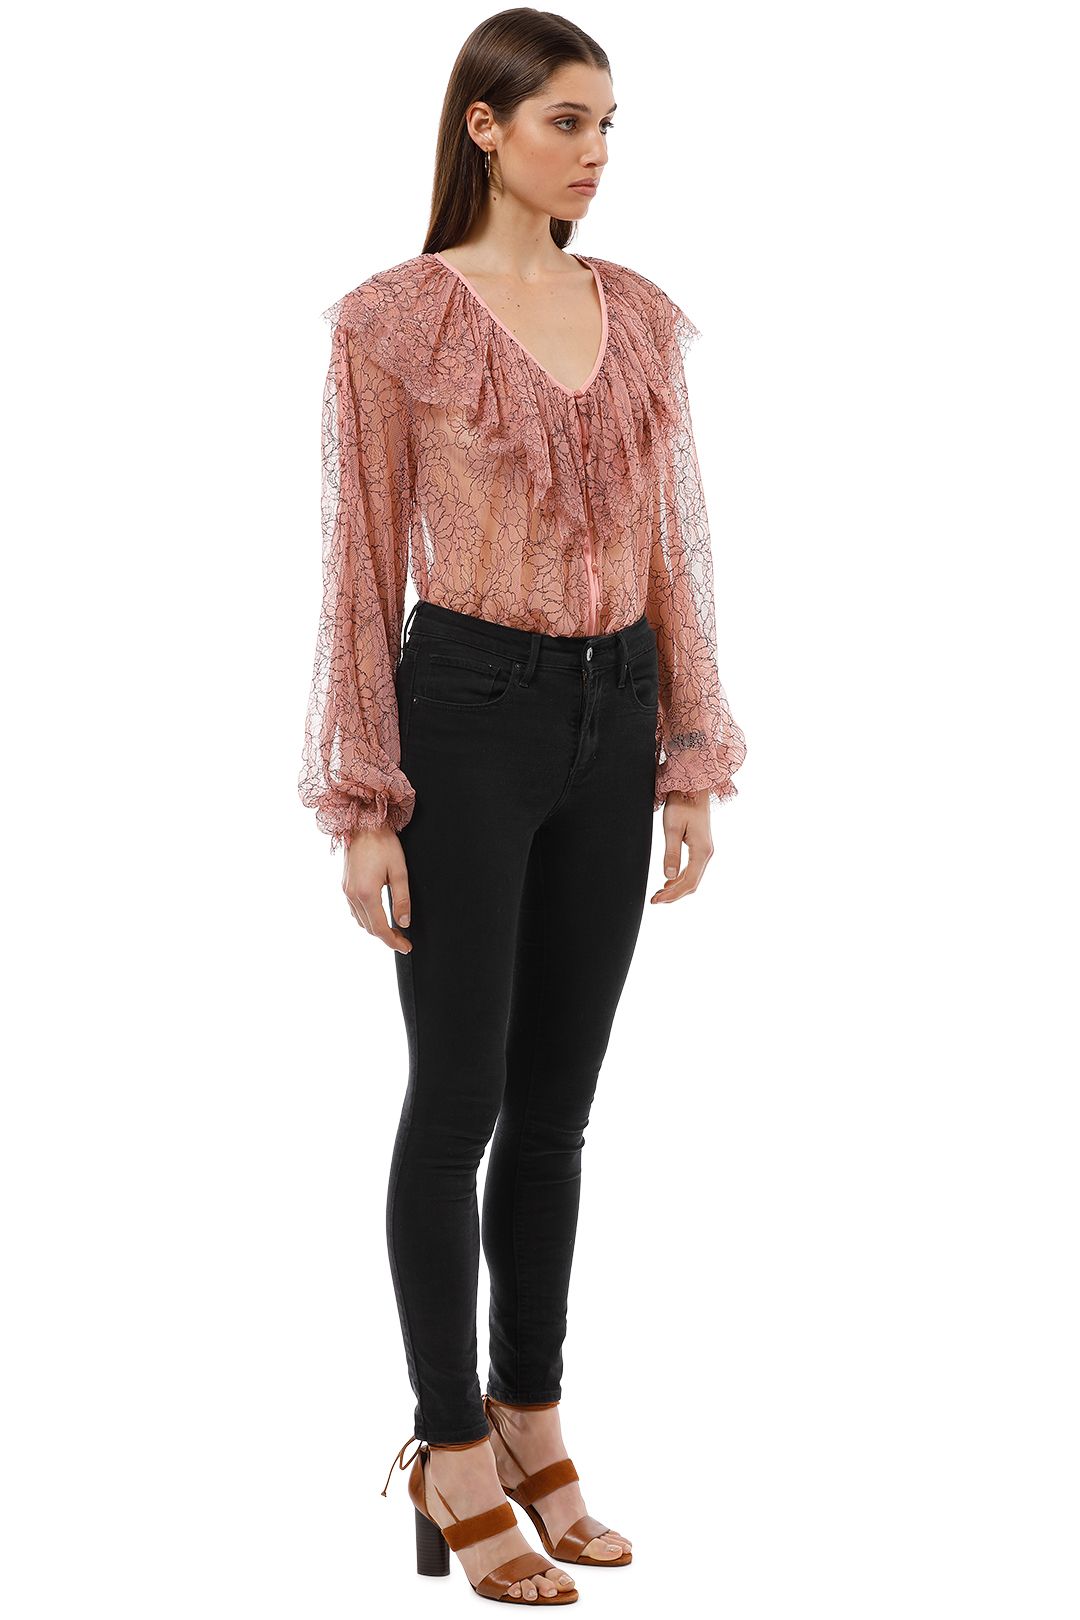 Alice McCall - Folklore Blouse - Blush Pink - Side